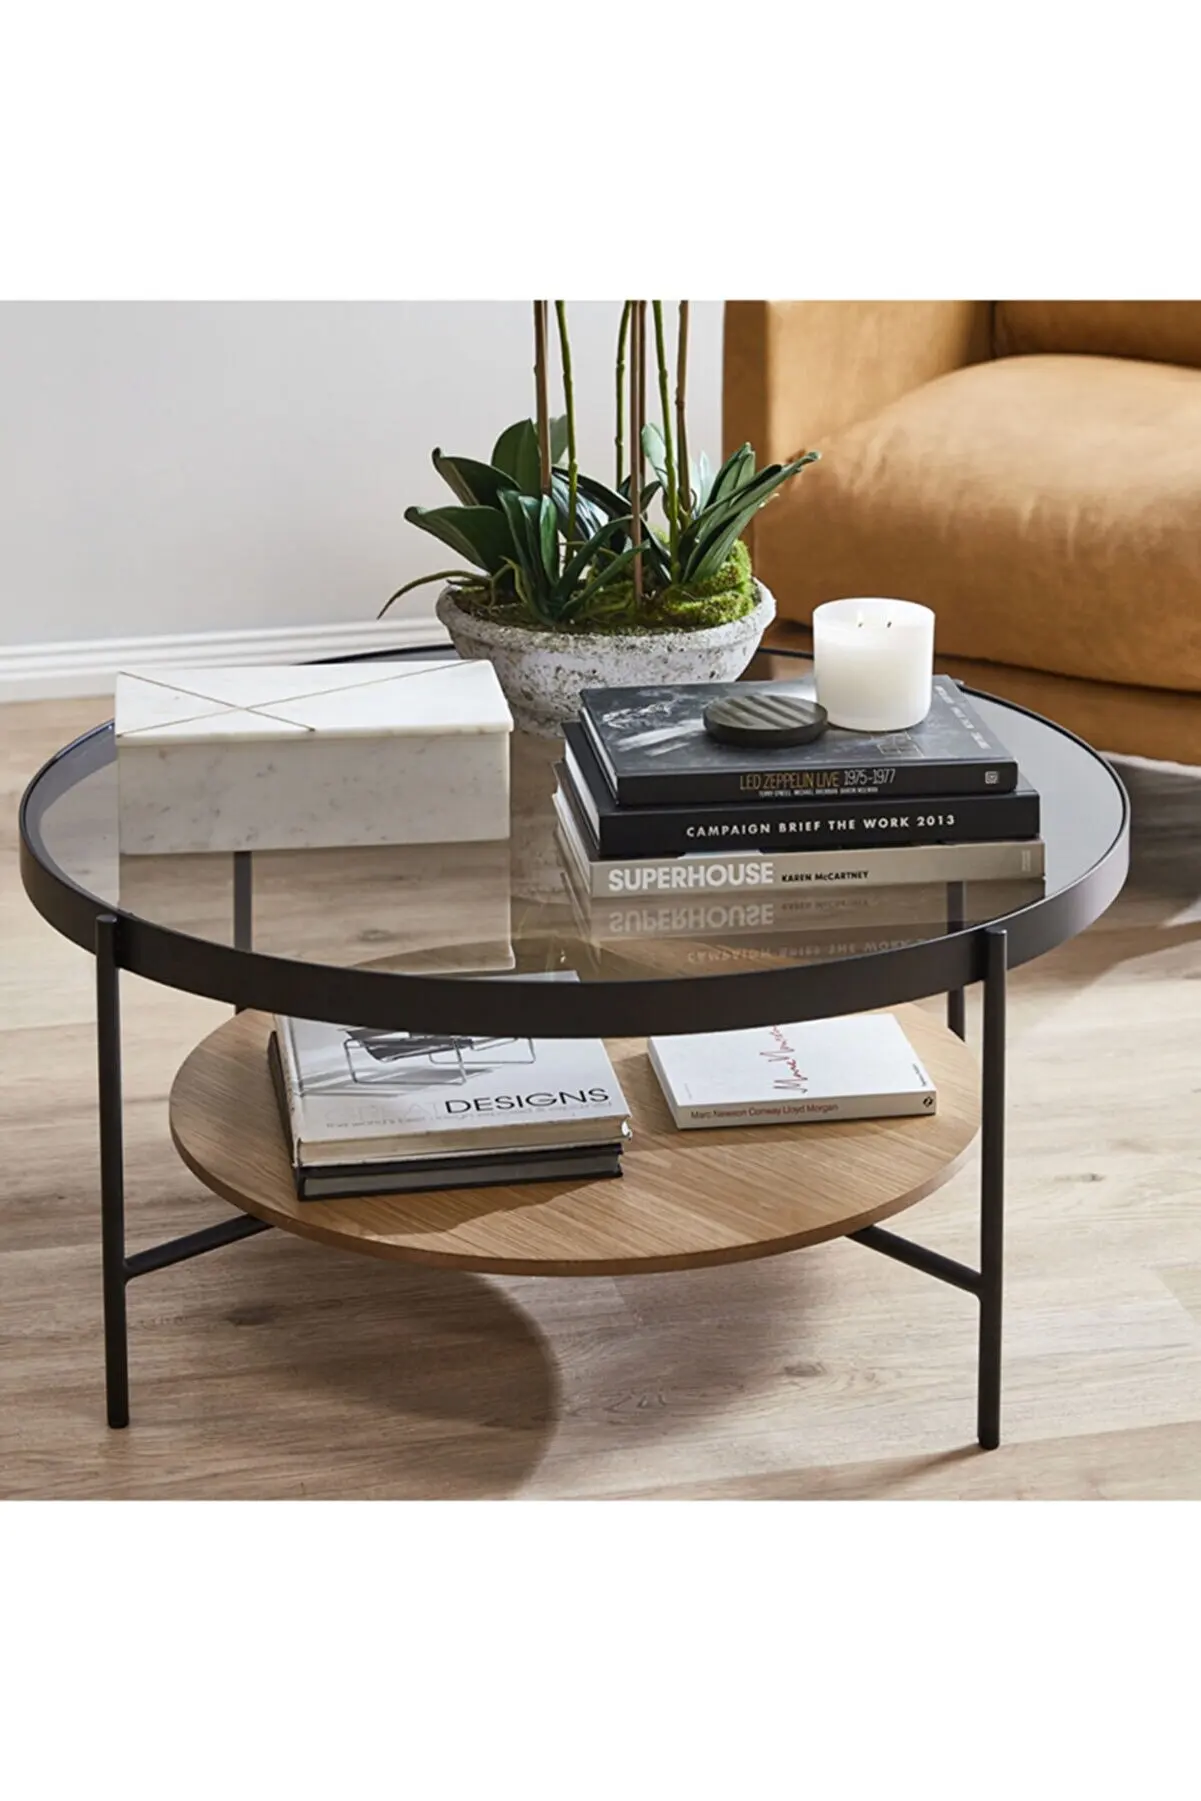 

TWO FLOOR COFFEE TABLE BLACK METAL SMOKE AND TRANSPARENT GLASS WALNUT BLACK WHITE MDF MODERN DECORATIVE STYLISH DINING TABLE